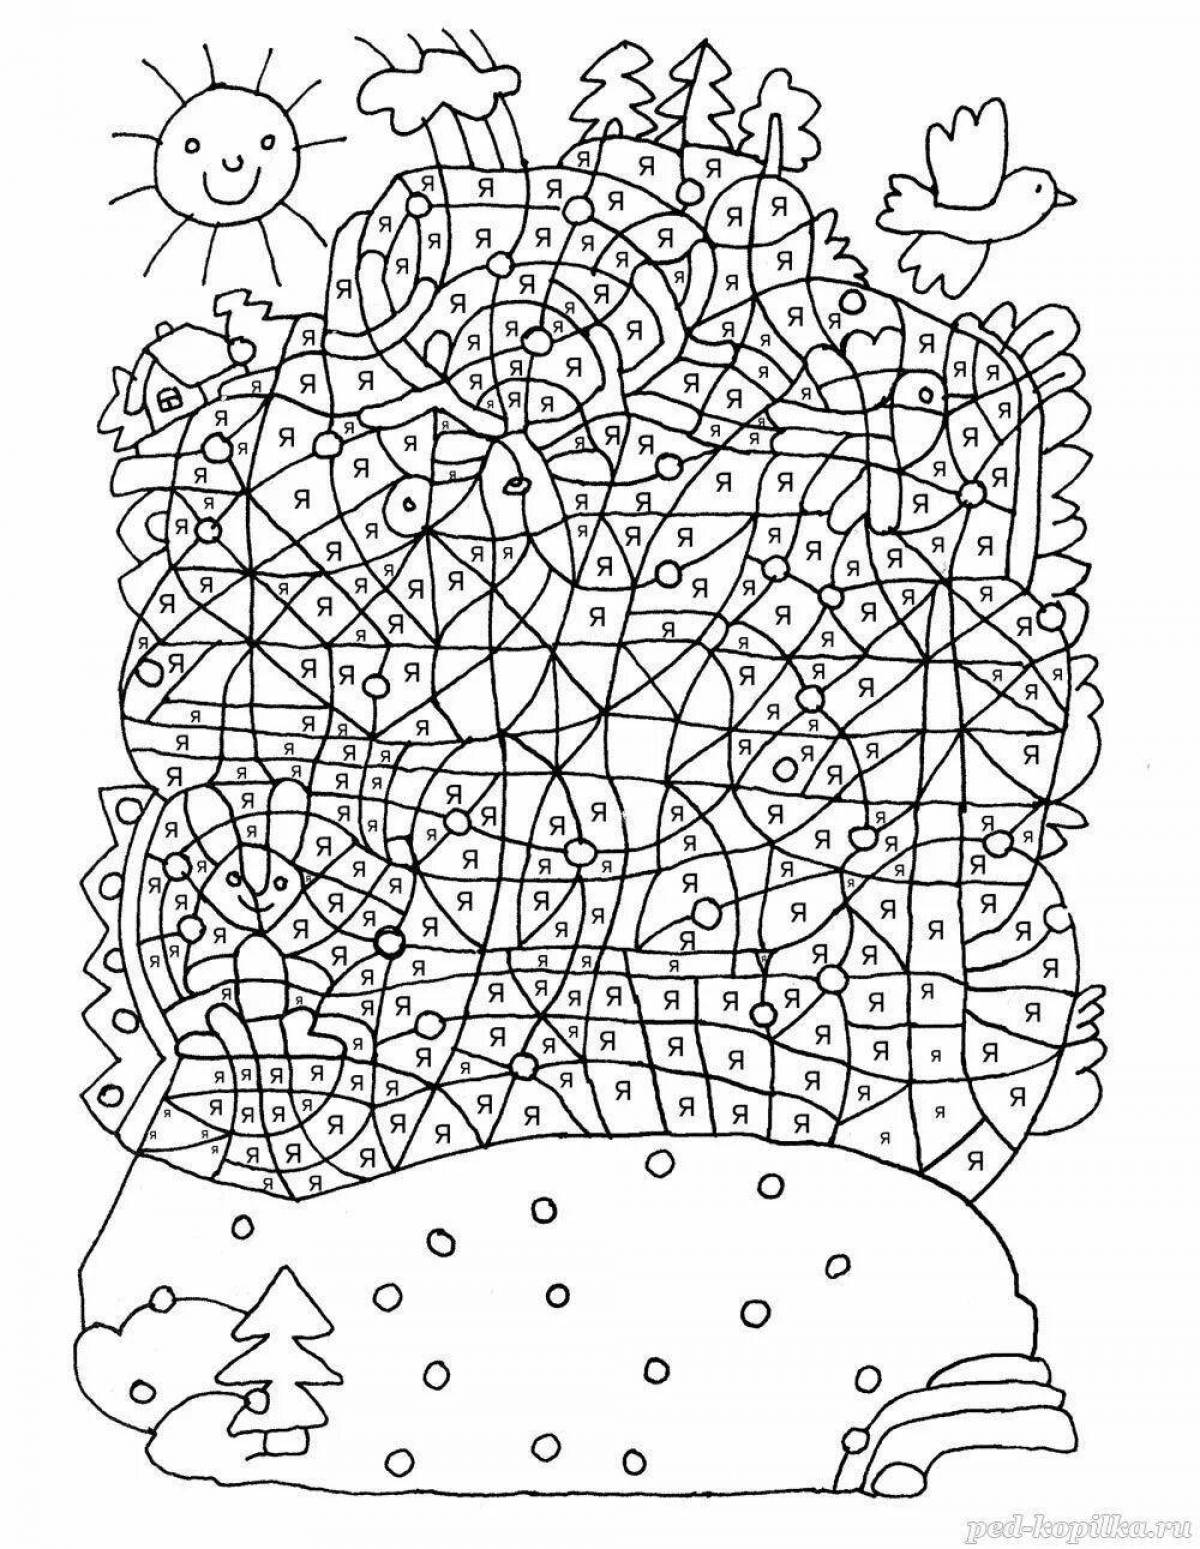 Creative spell coloring page for 7-8 year olds